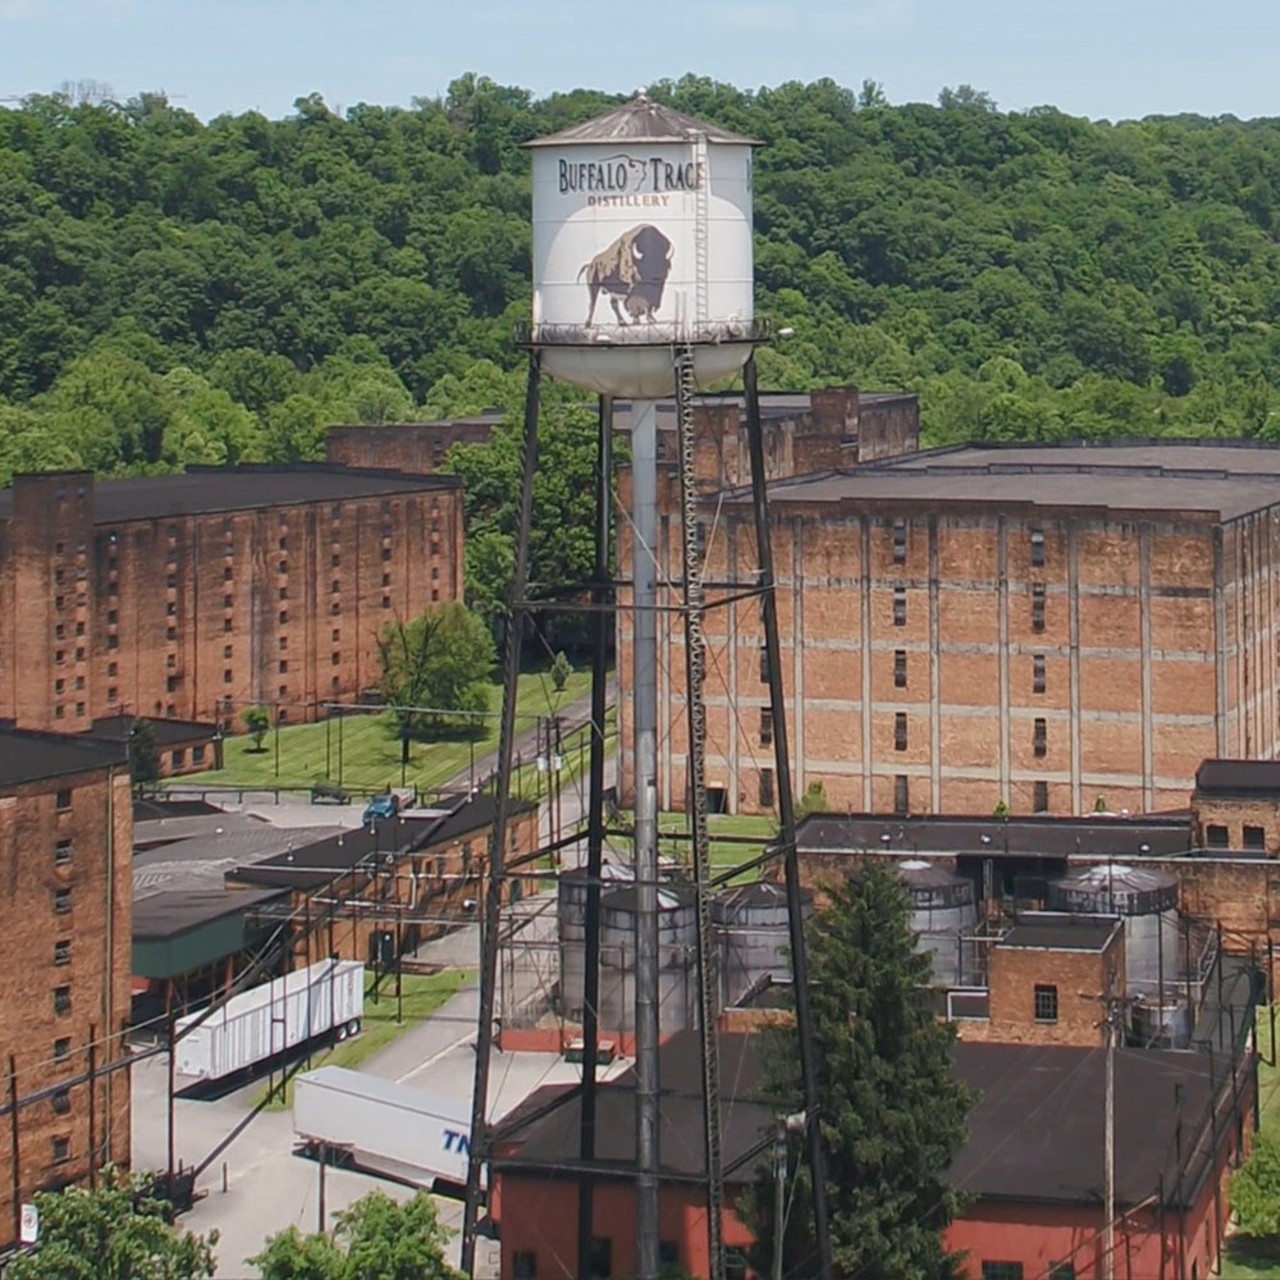 Buffalo Trace Distillery 
113 Great Buffalo Trace, Frankfort
Talk about places filled with spirits! Employees and tourists of the Buffalo Trace Distillery in Frankfort claim to have witnessed paranormal activity and heard sounds throughout the building. The TV shows &#147;Paranormal Lockdown&#148; and &#147;Ghost Hunters&#148; have both paid Buffalo Trace a visit. Photo via  Buffalo Trace Distillery/Facebook 